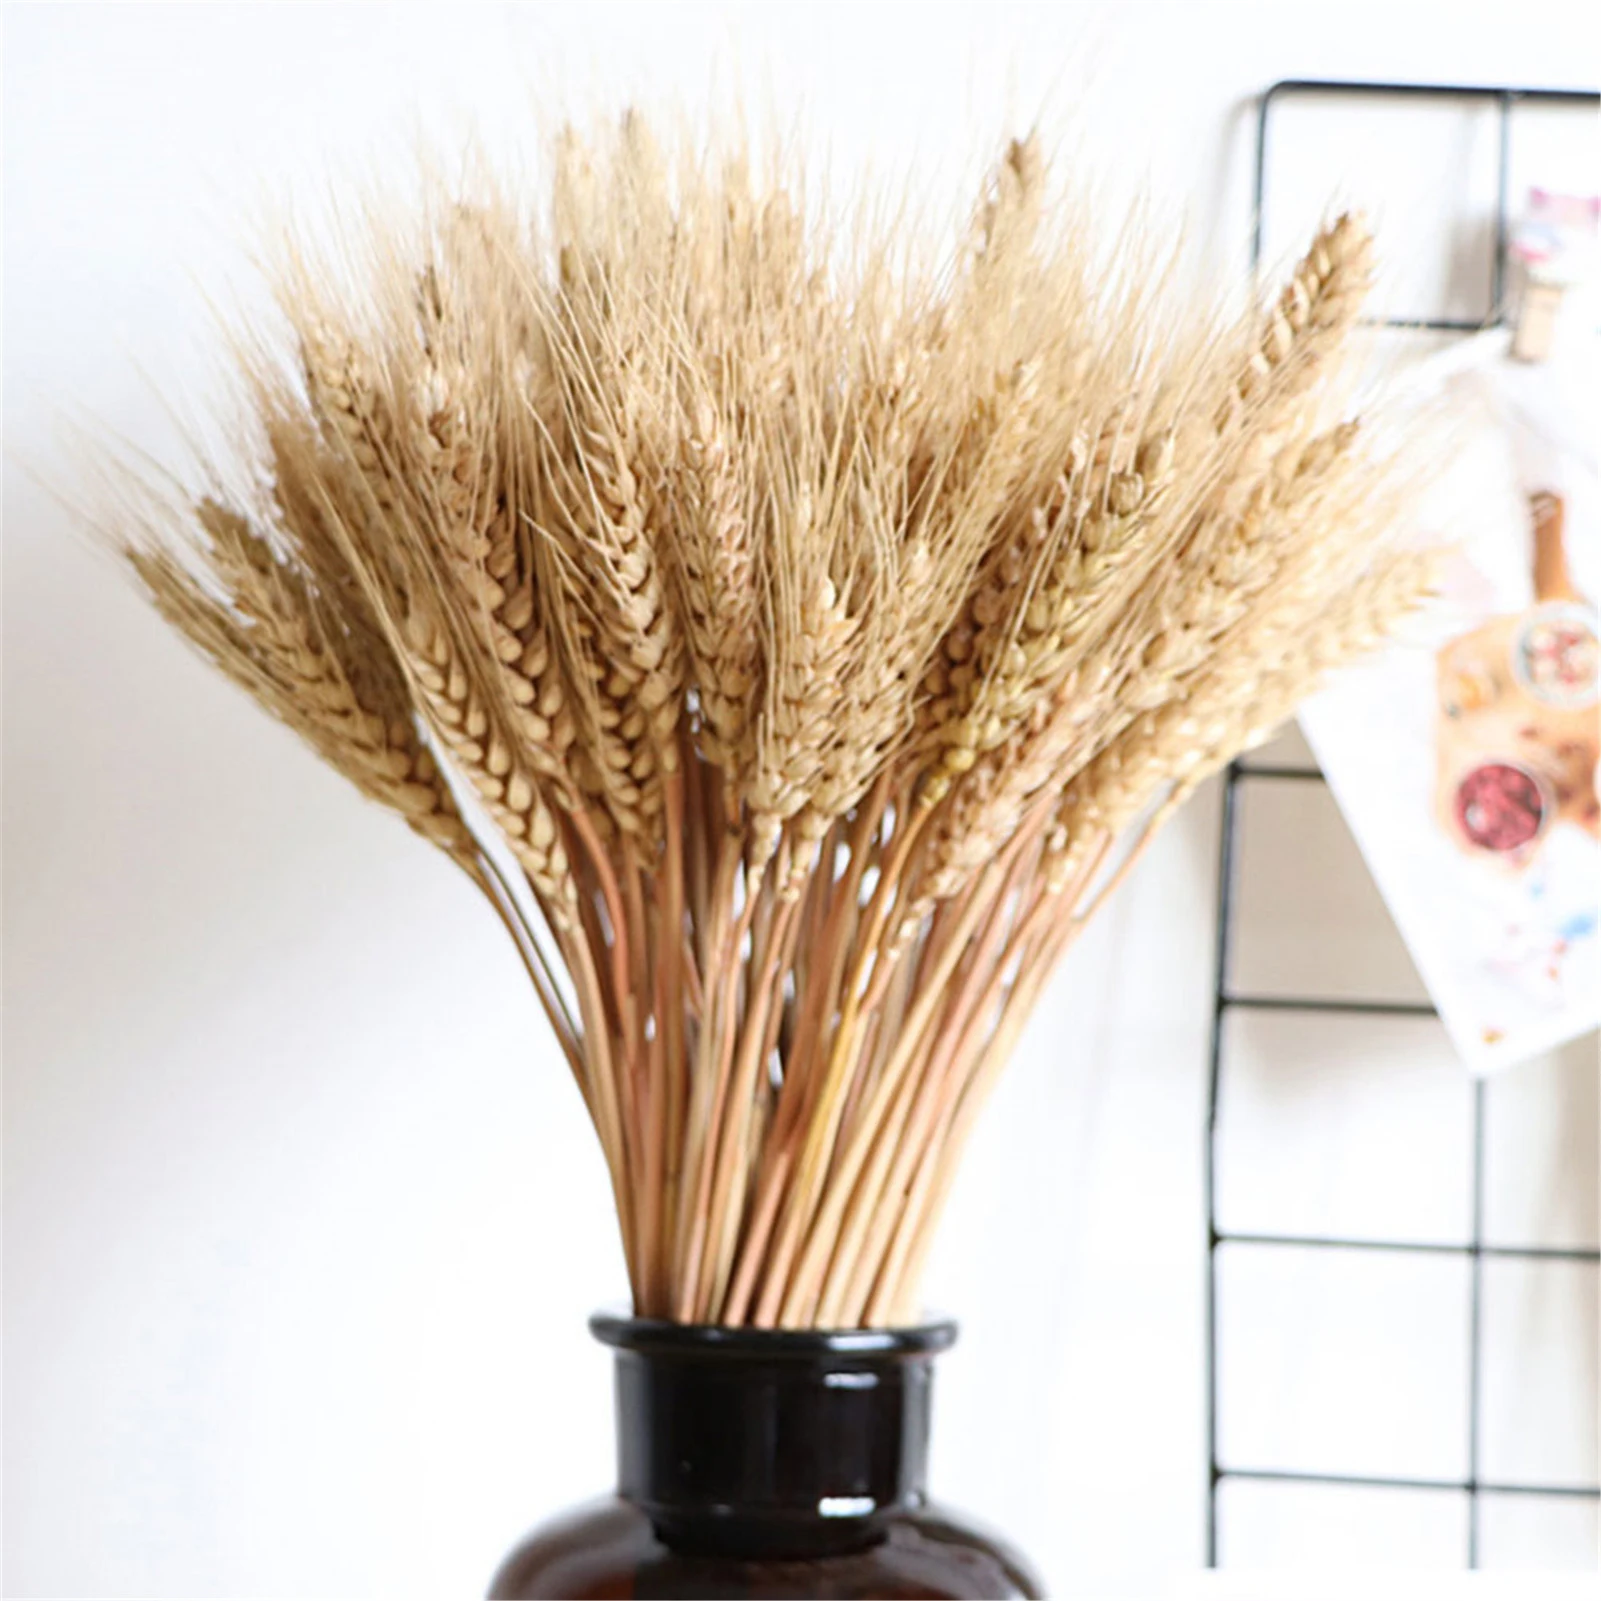 100ps Natural Wheat Ear Wheat Rice Ear Farmhouse Opening Barley Real Dried Flower Bouquet Pastoral Dry Branch Gift Wedding Decor